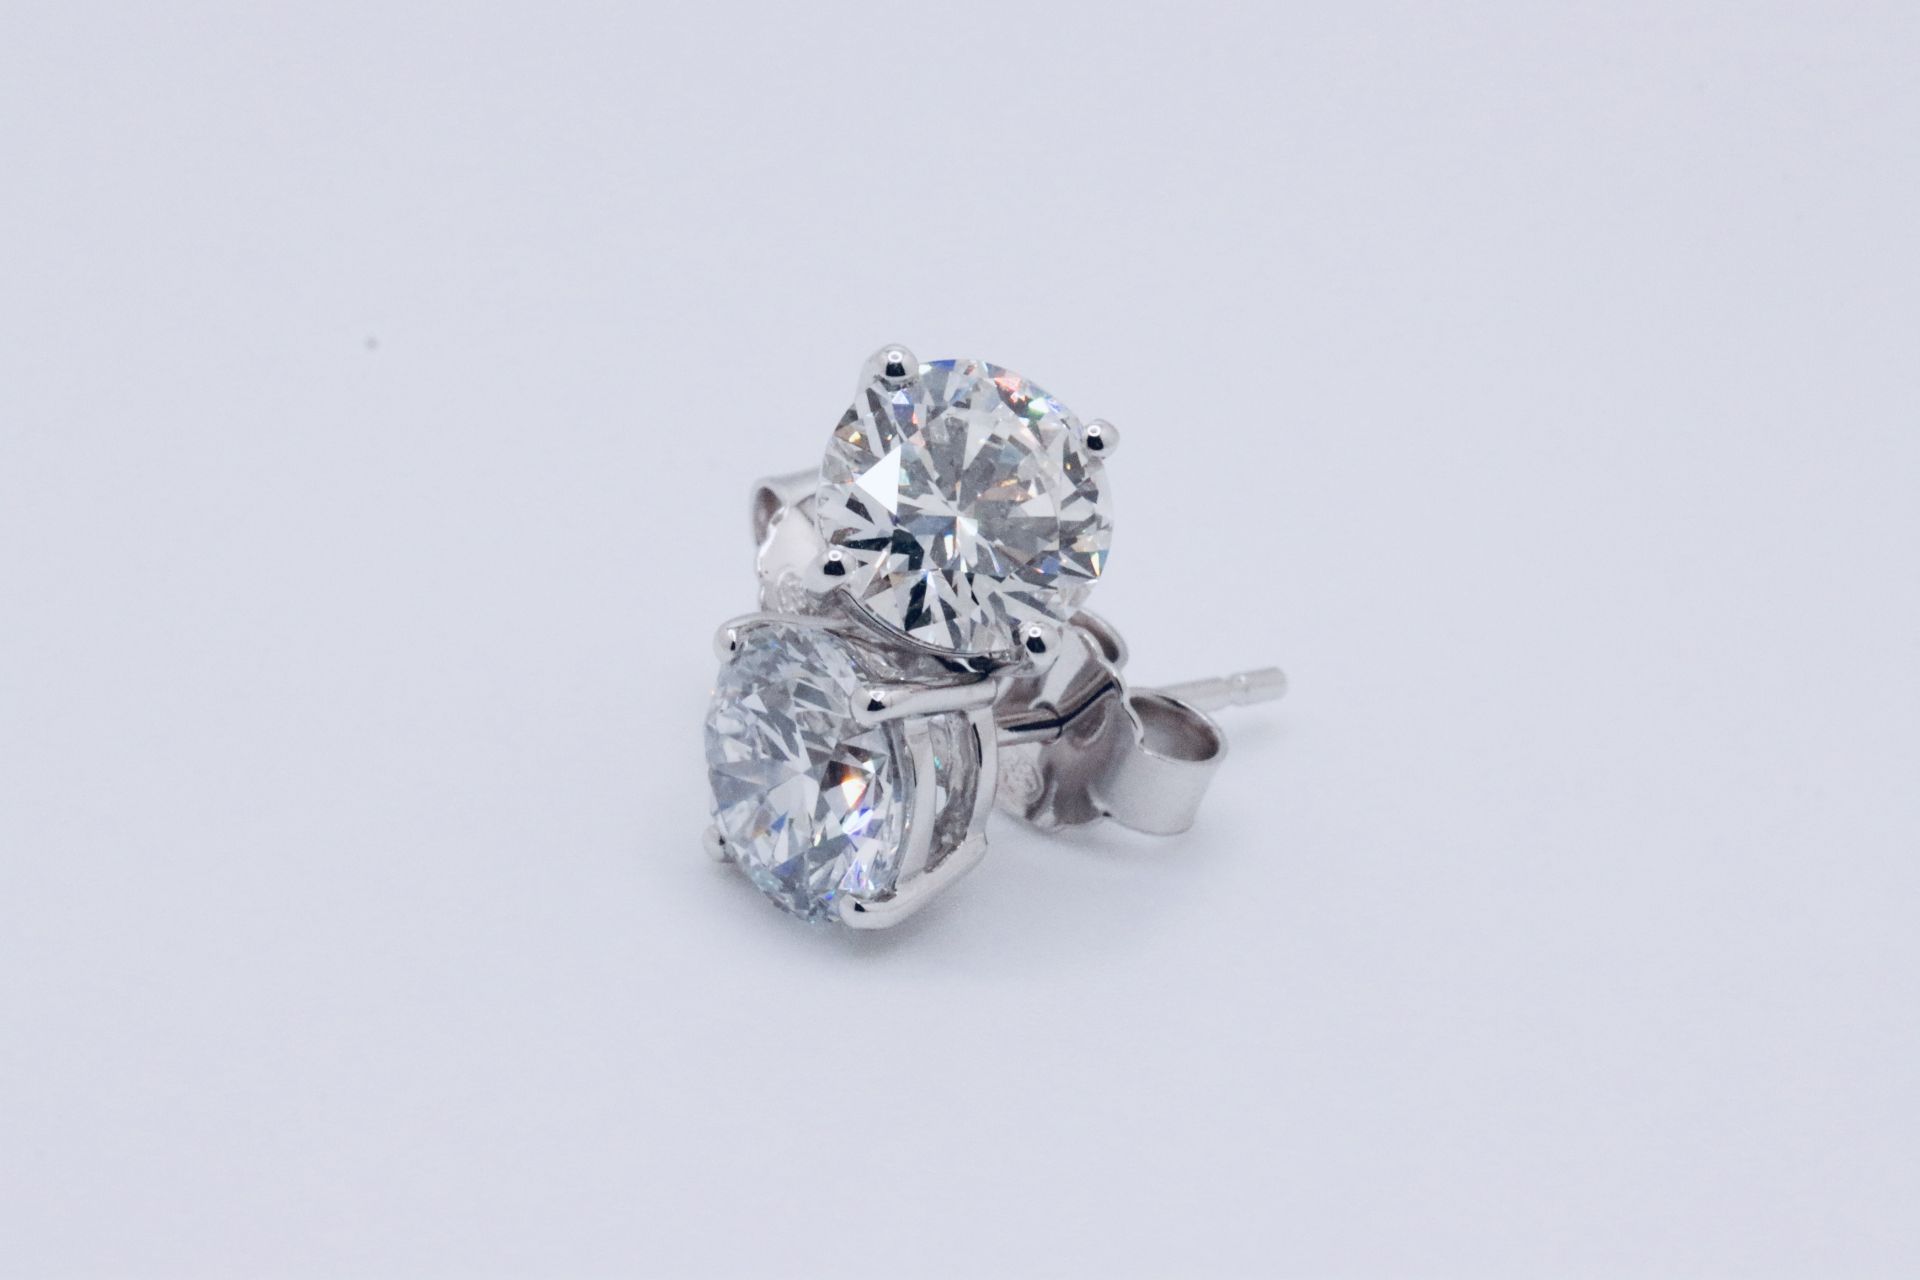 ** ON SALE ** Round Brilliant Cut 5.00 Carat Diamond Earrings Set in 18kt White Gold - F Colour - Image 4 of 7